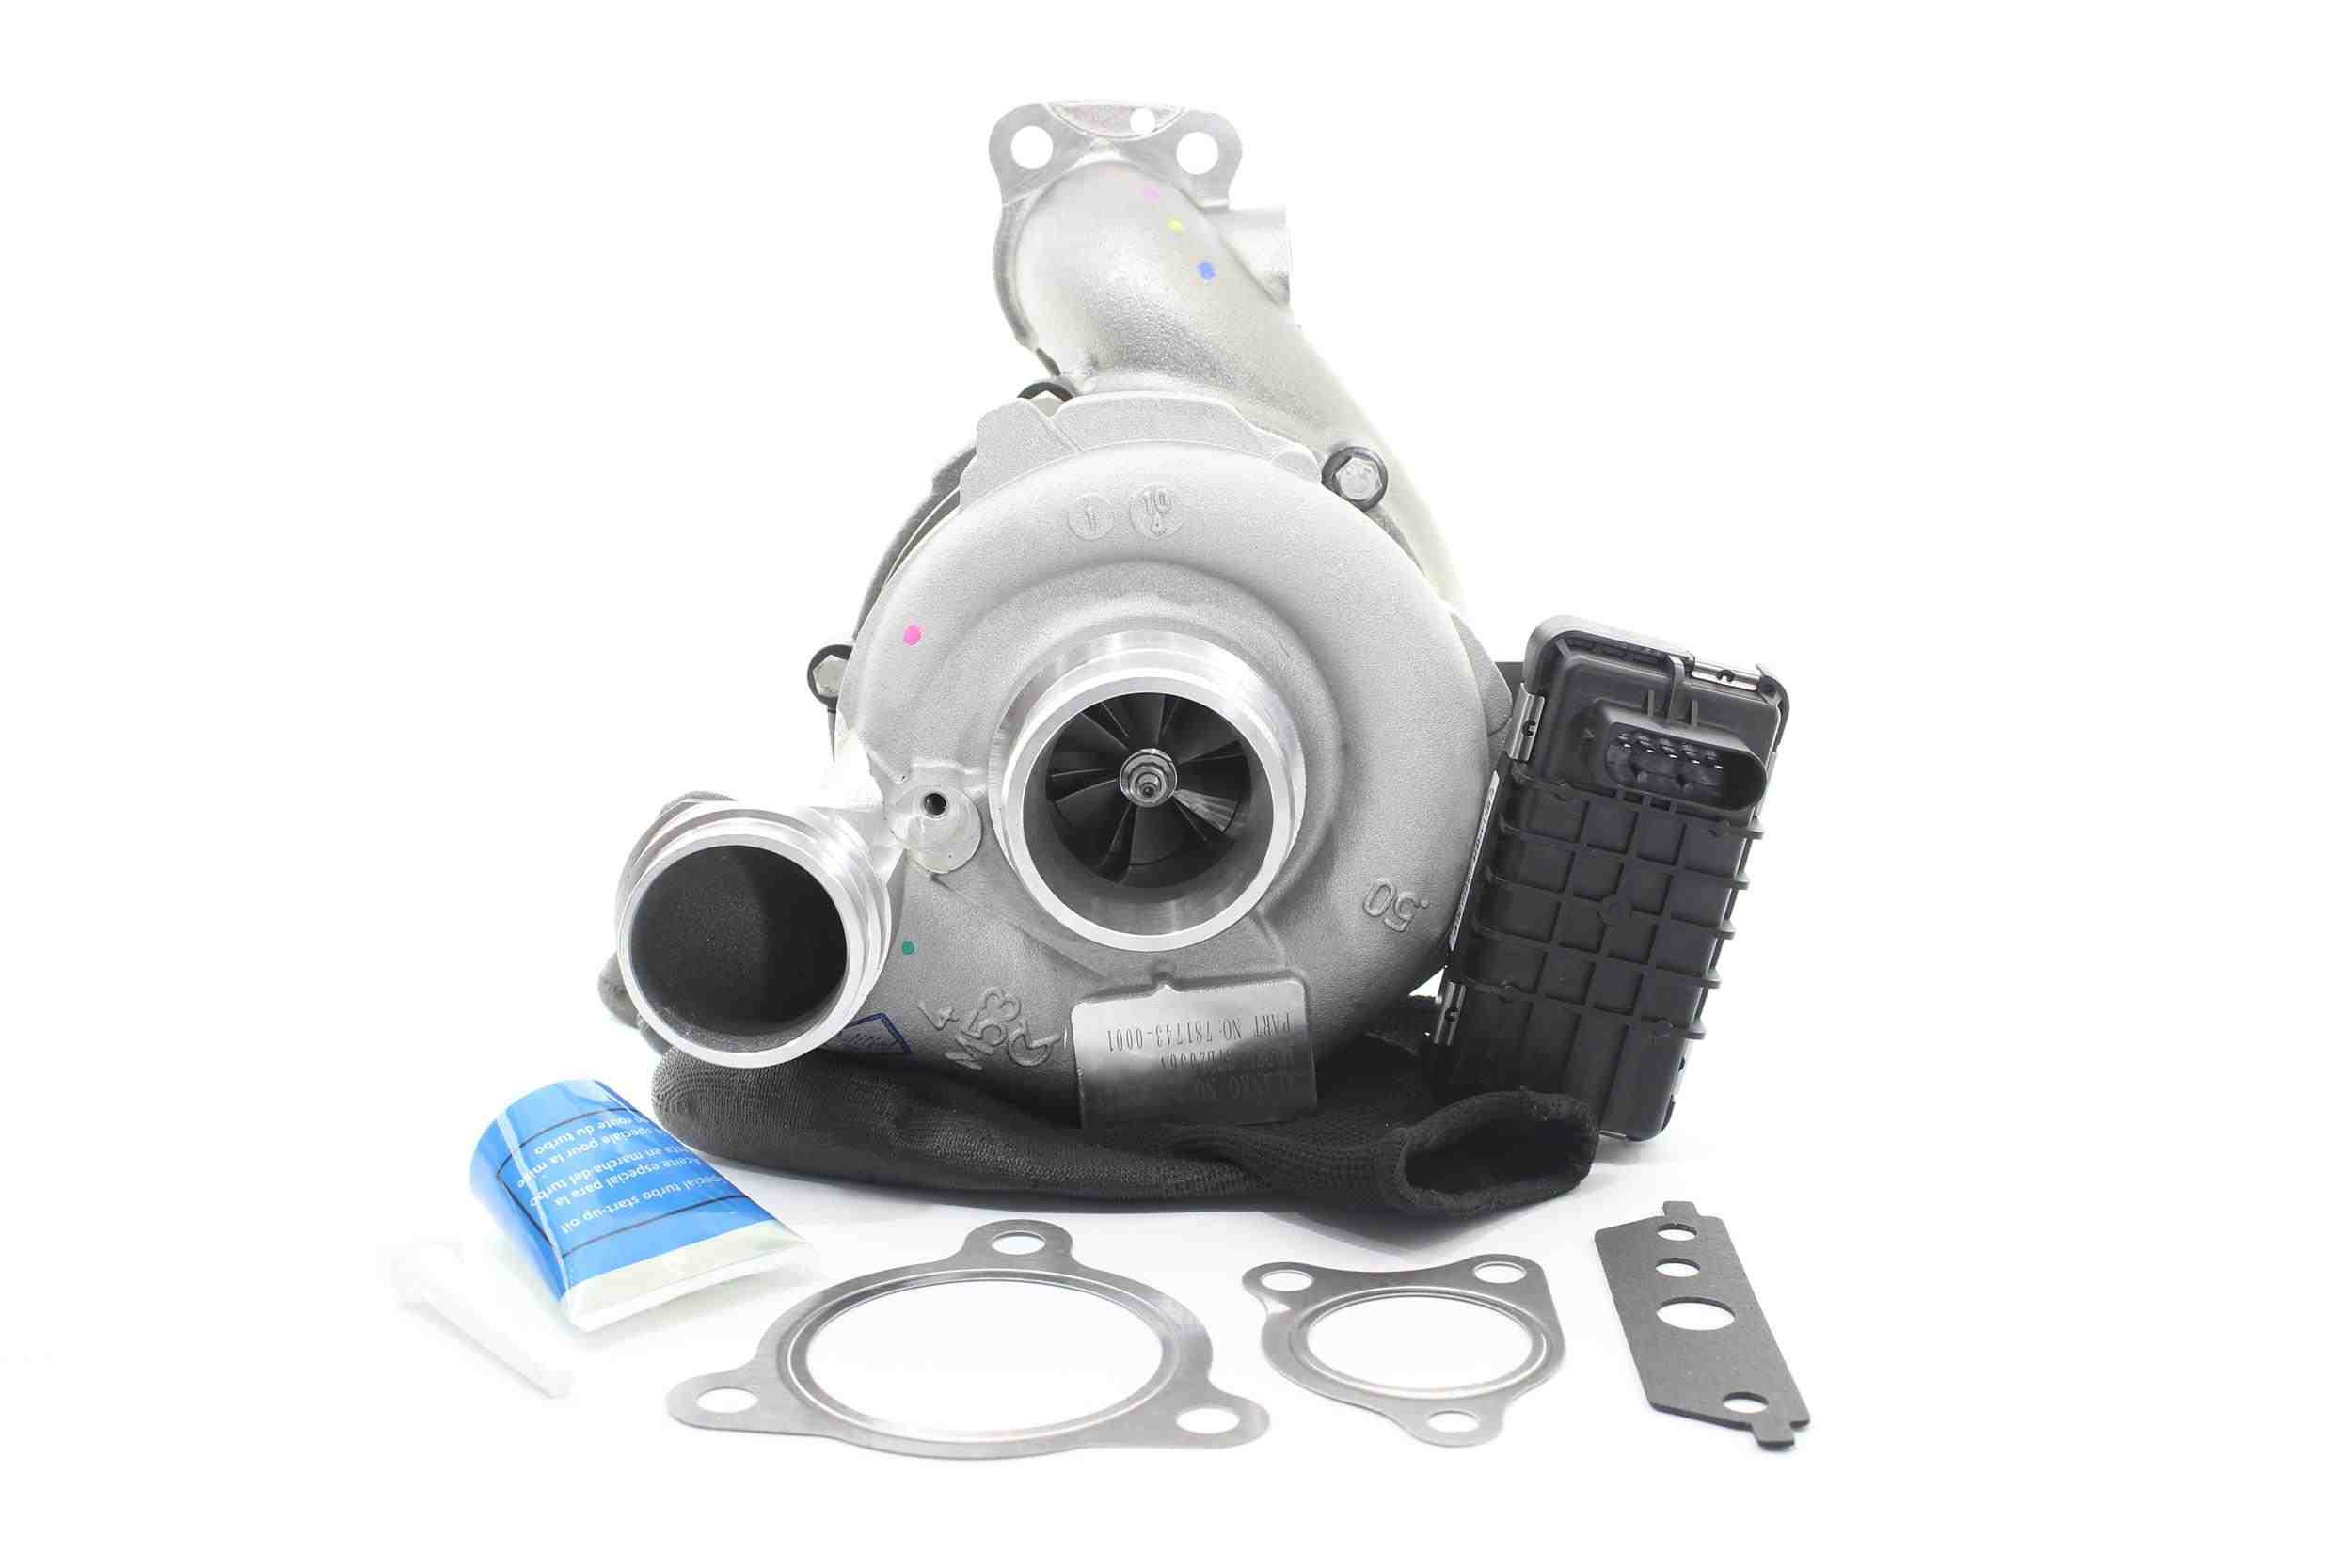 ALANKO 10901029 Turbocharger Exhaust Turbocharger, Incl. Gasket Set, with attachment material